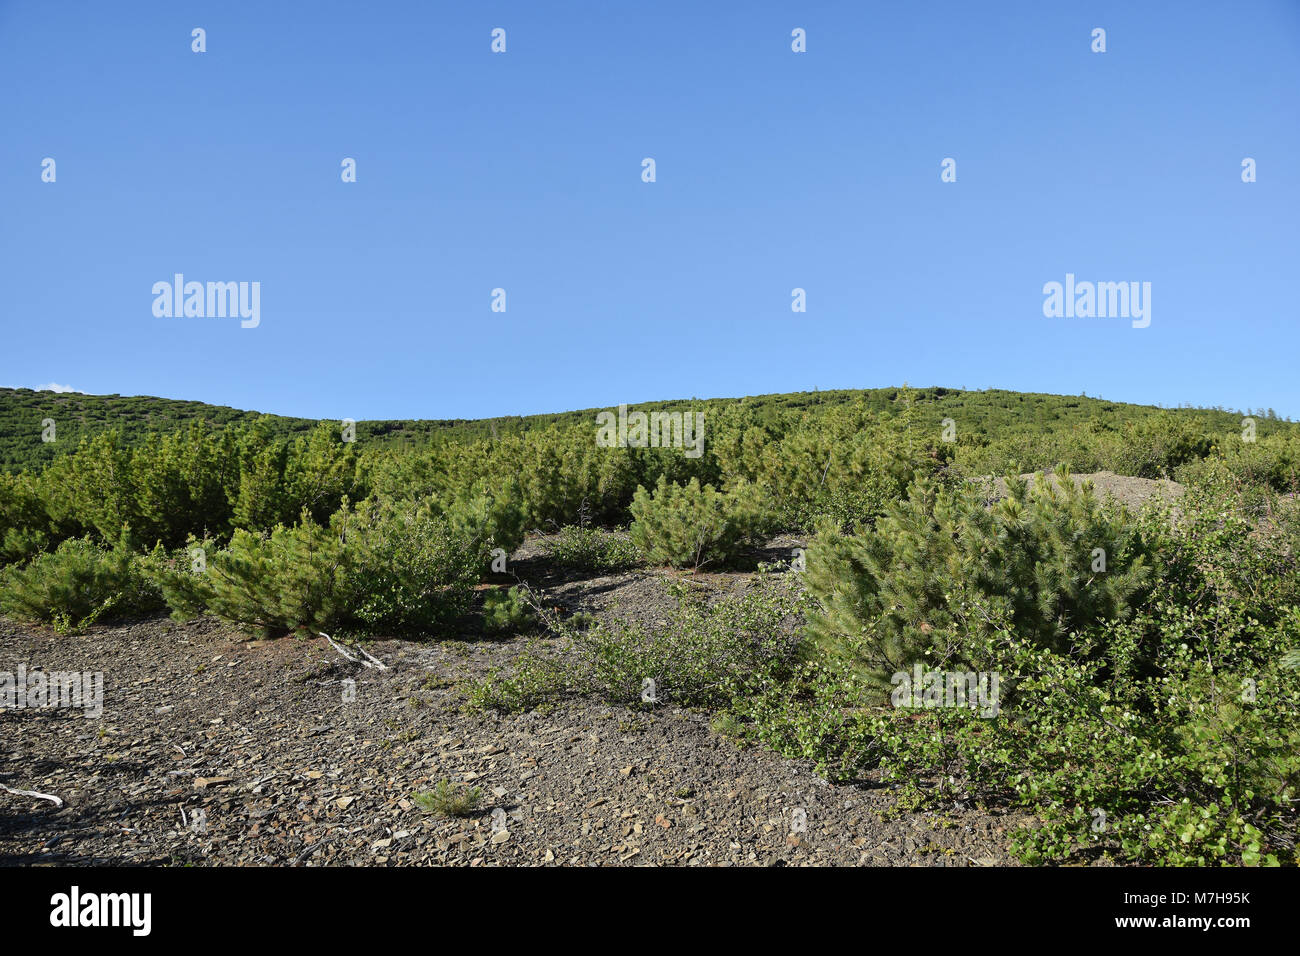 Pinus Pumila trees covering mountains on the Kolyma highway north of the city of Iagodnoie. Stock Photo